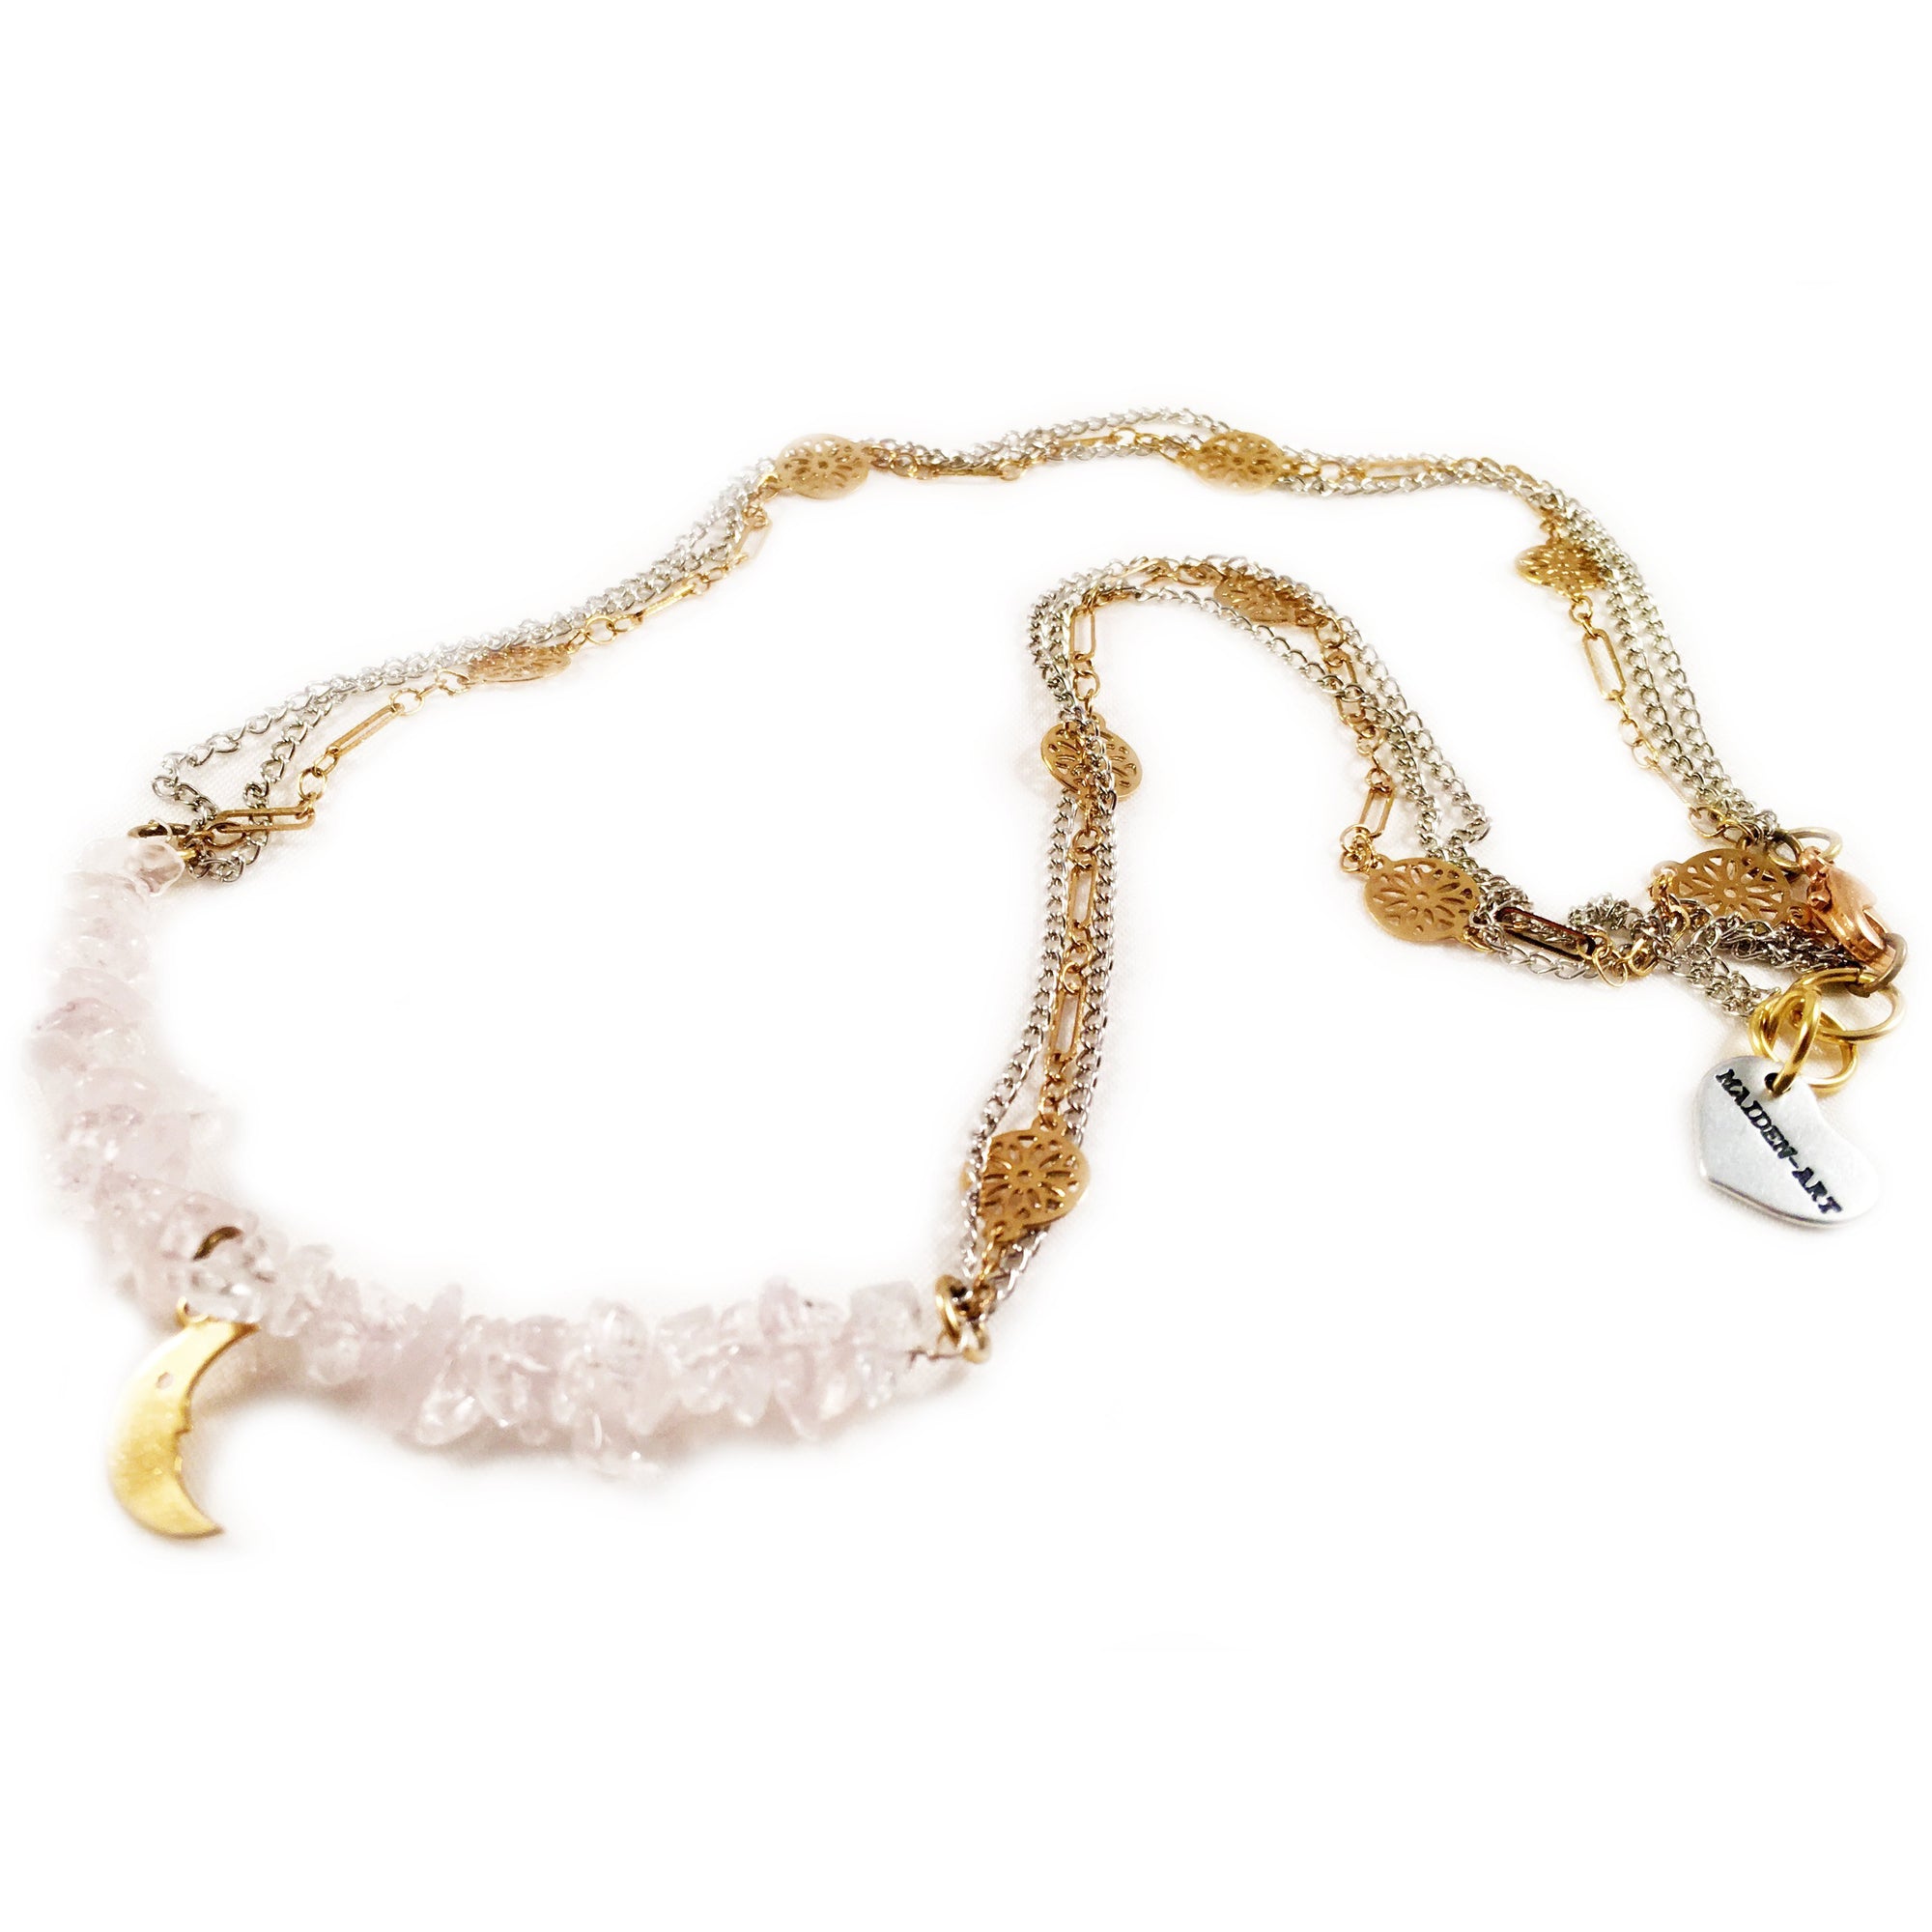 Rose Quartz and 18kt Gold Plated Choker Necklace With Moon Charm.